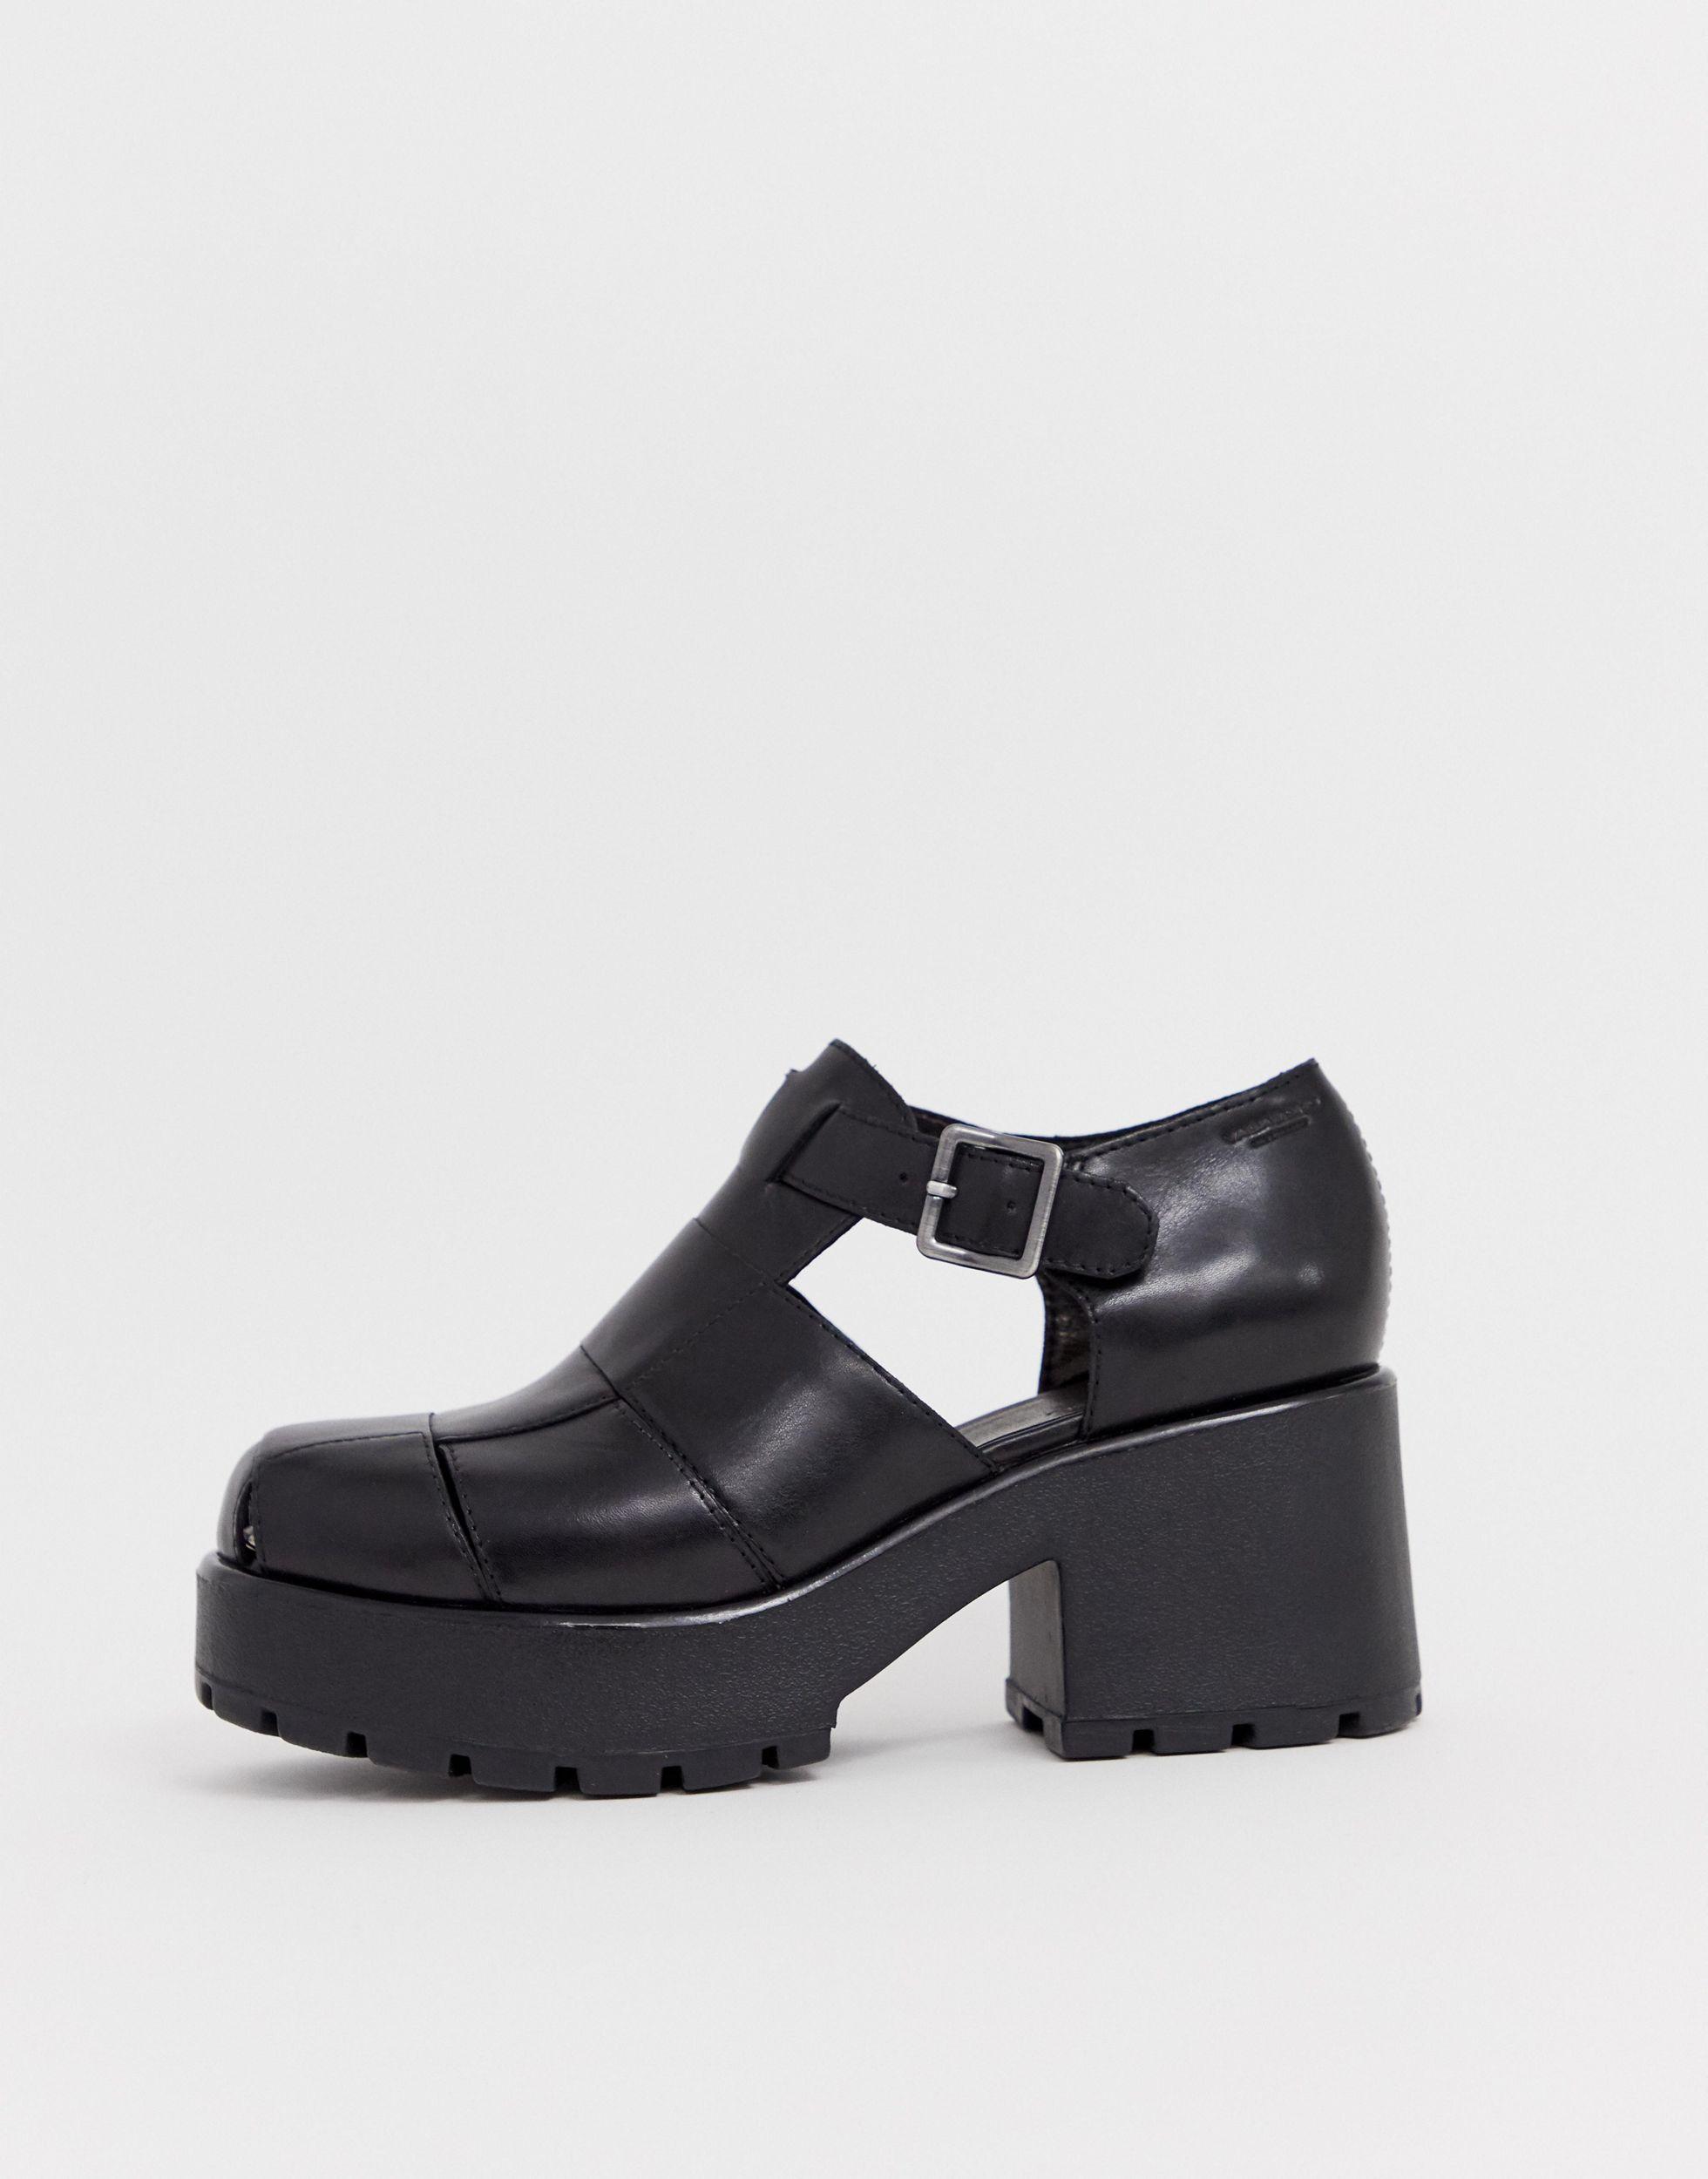 Vagabond Shoemakers Dioon Black Leather Chunky Heeled Shoes | Lyst